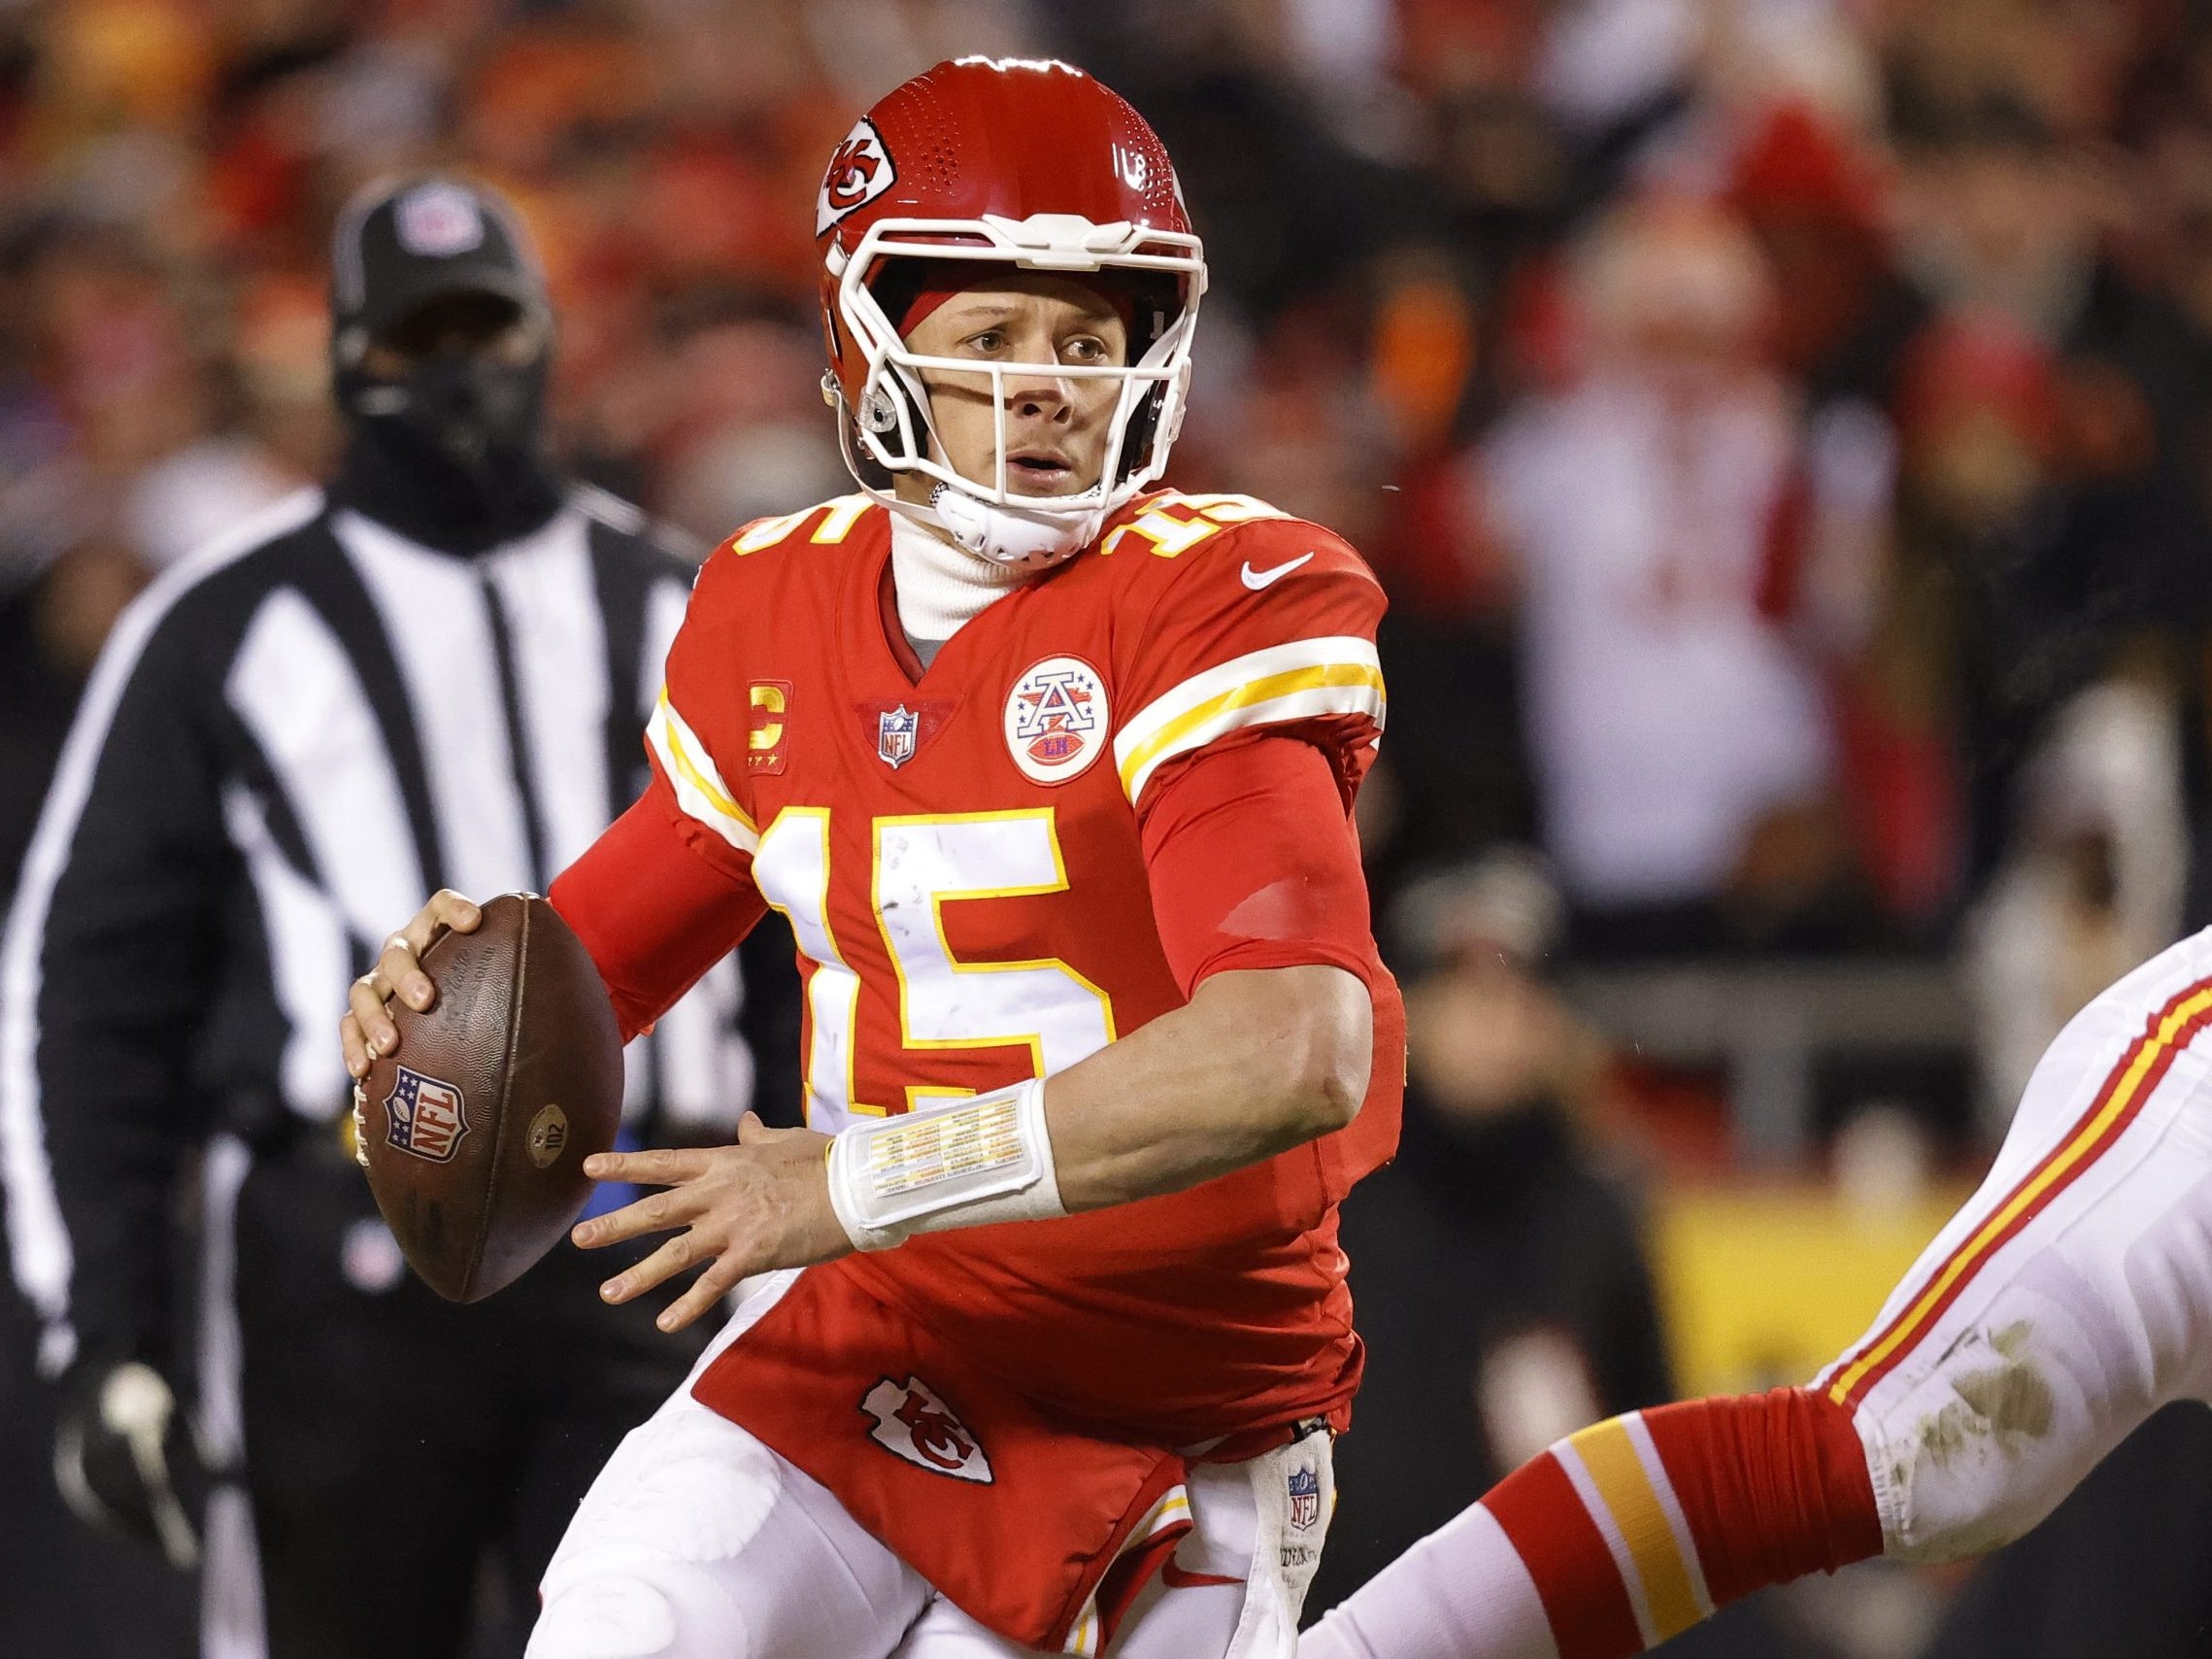 Chiefs vs. Bengals proves to be a thriller once again as